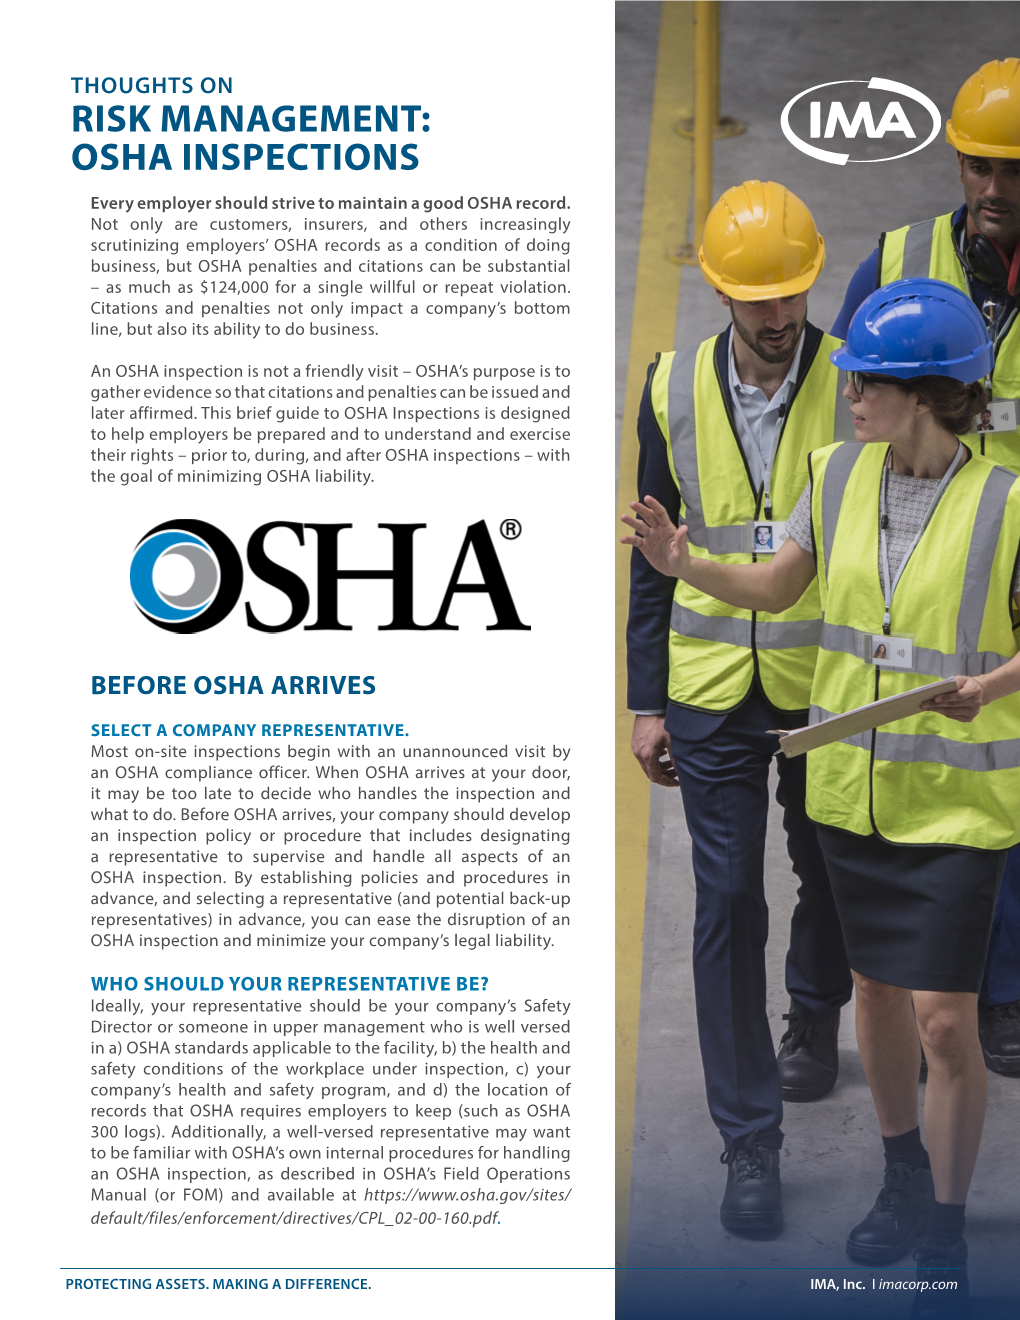 RISK MANAGEMENT: OSHA INSPECTIONS Every Employer Should Strive to Maintain a Good OSHA Record